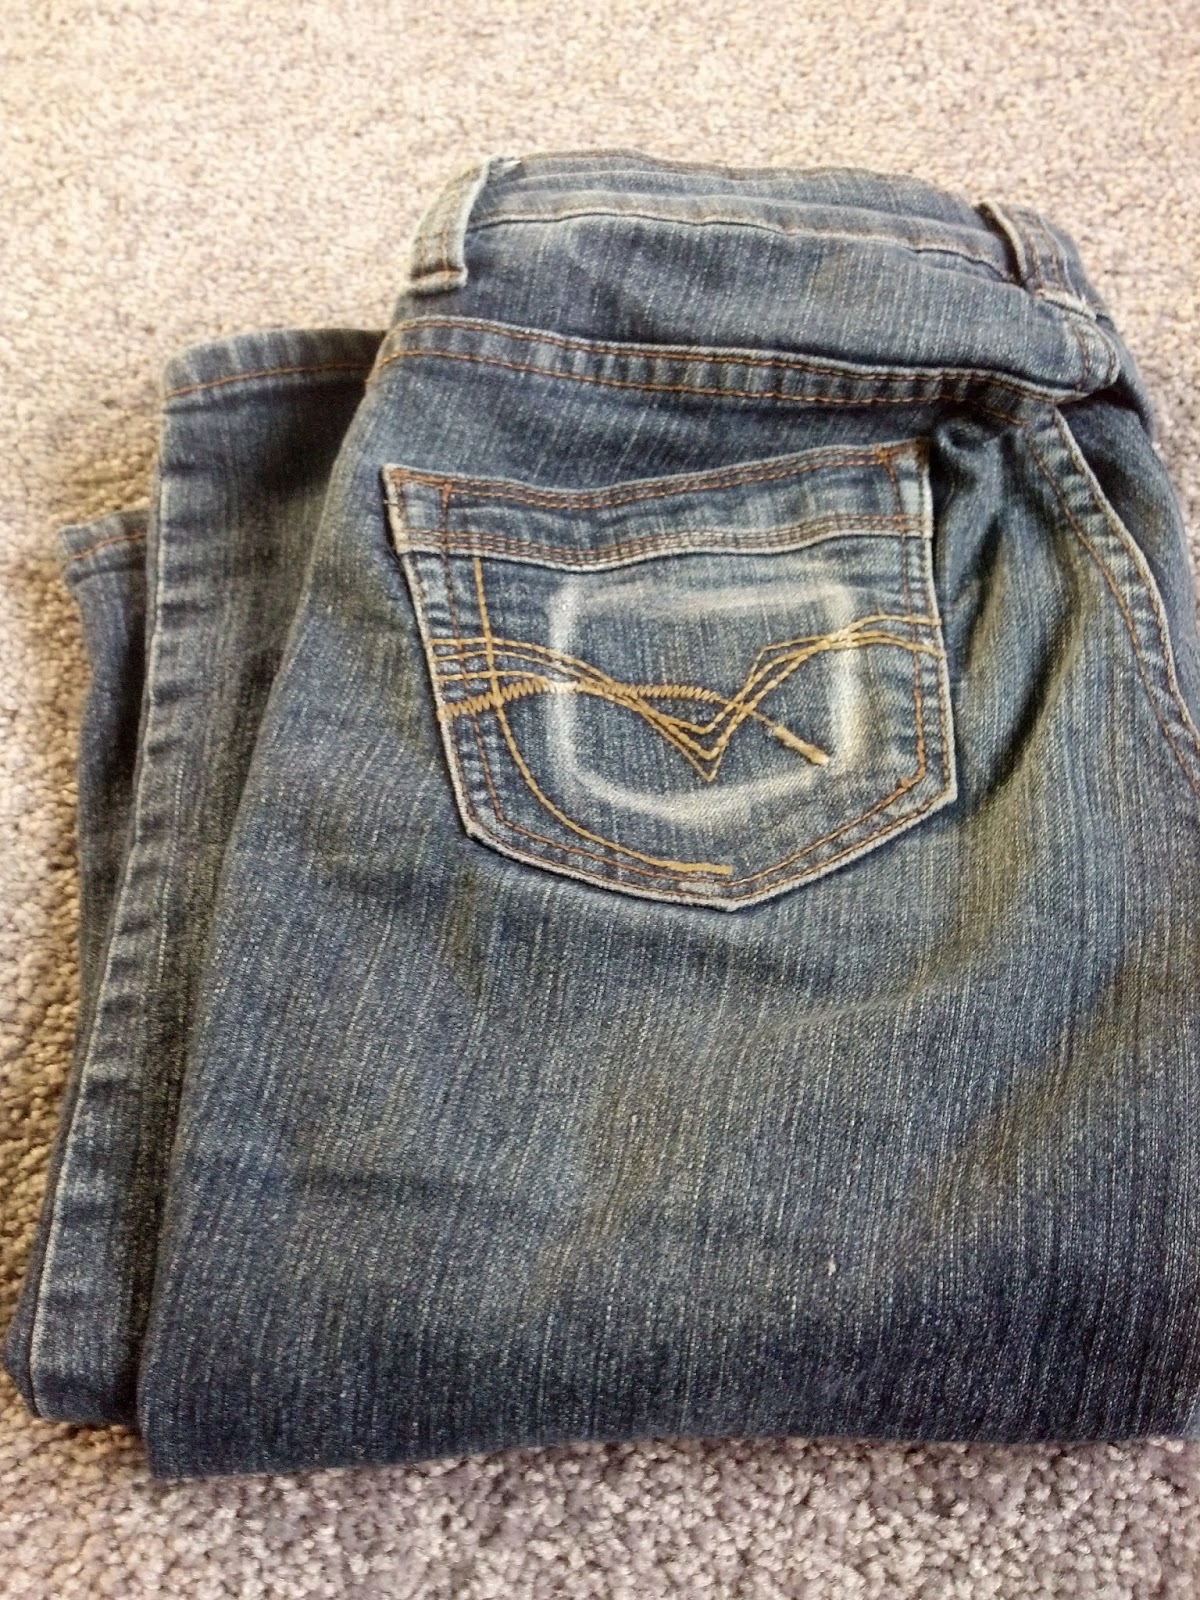 StephanieEspina: D.I.Y all the time! Upcycle old pair of jeans